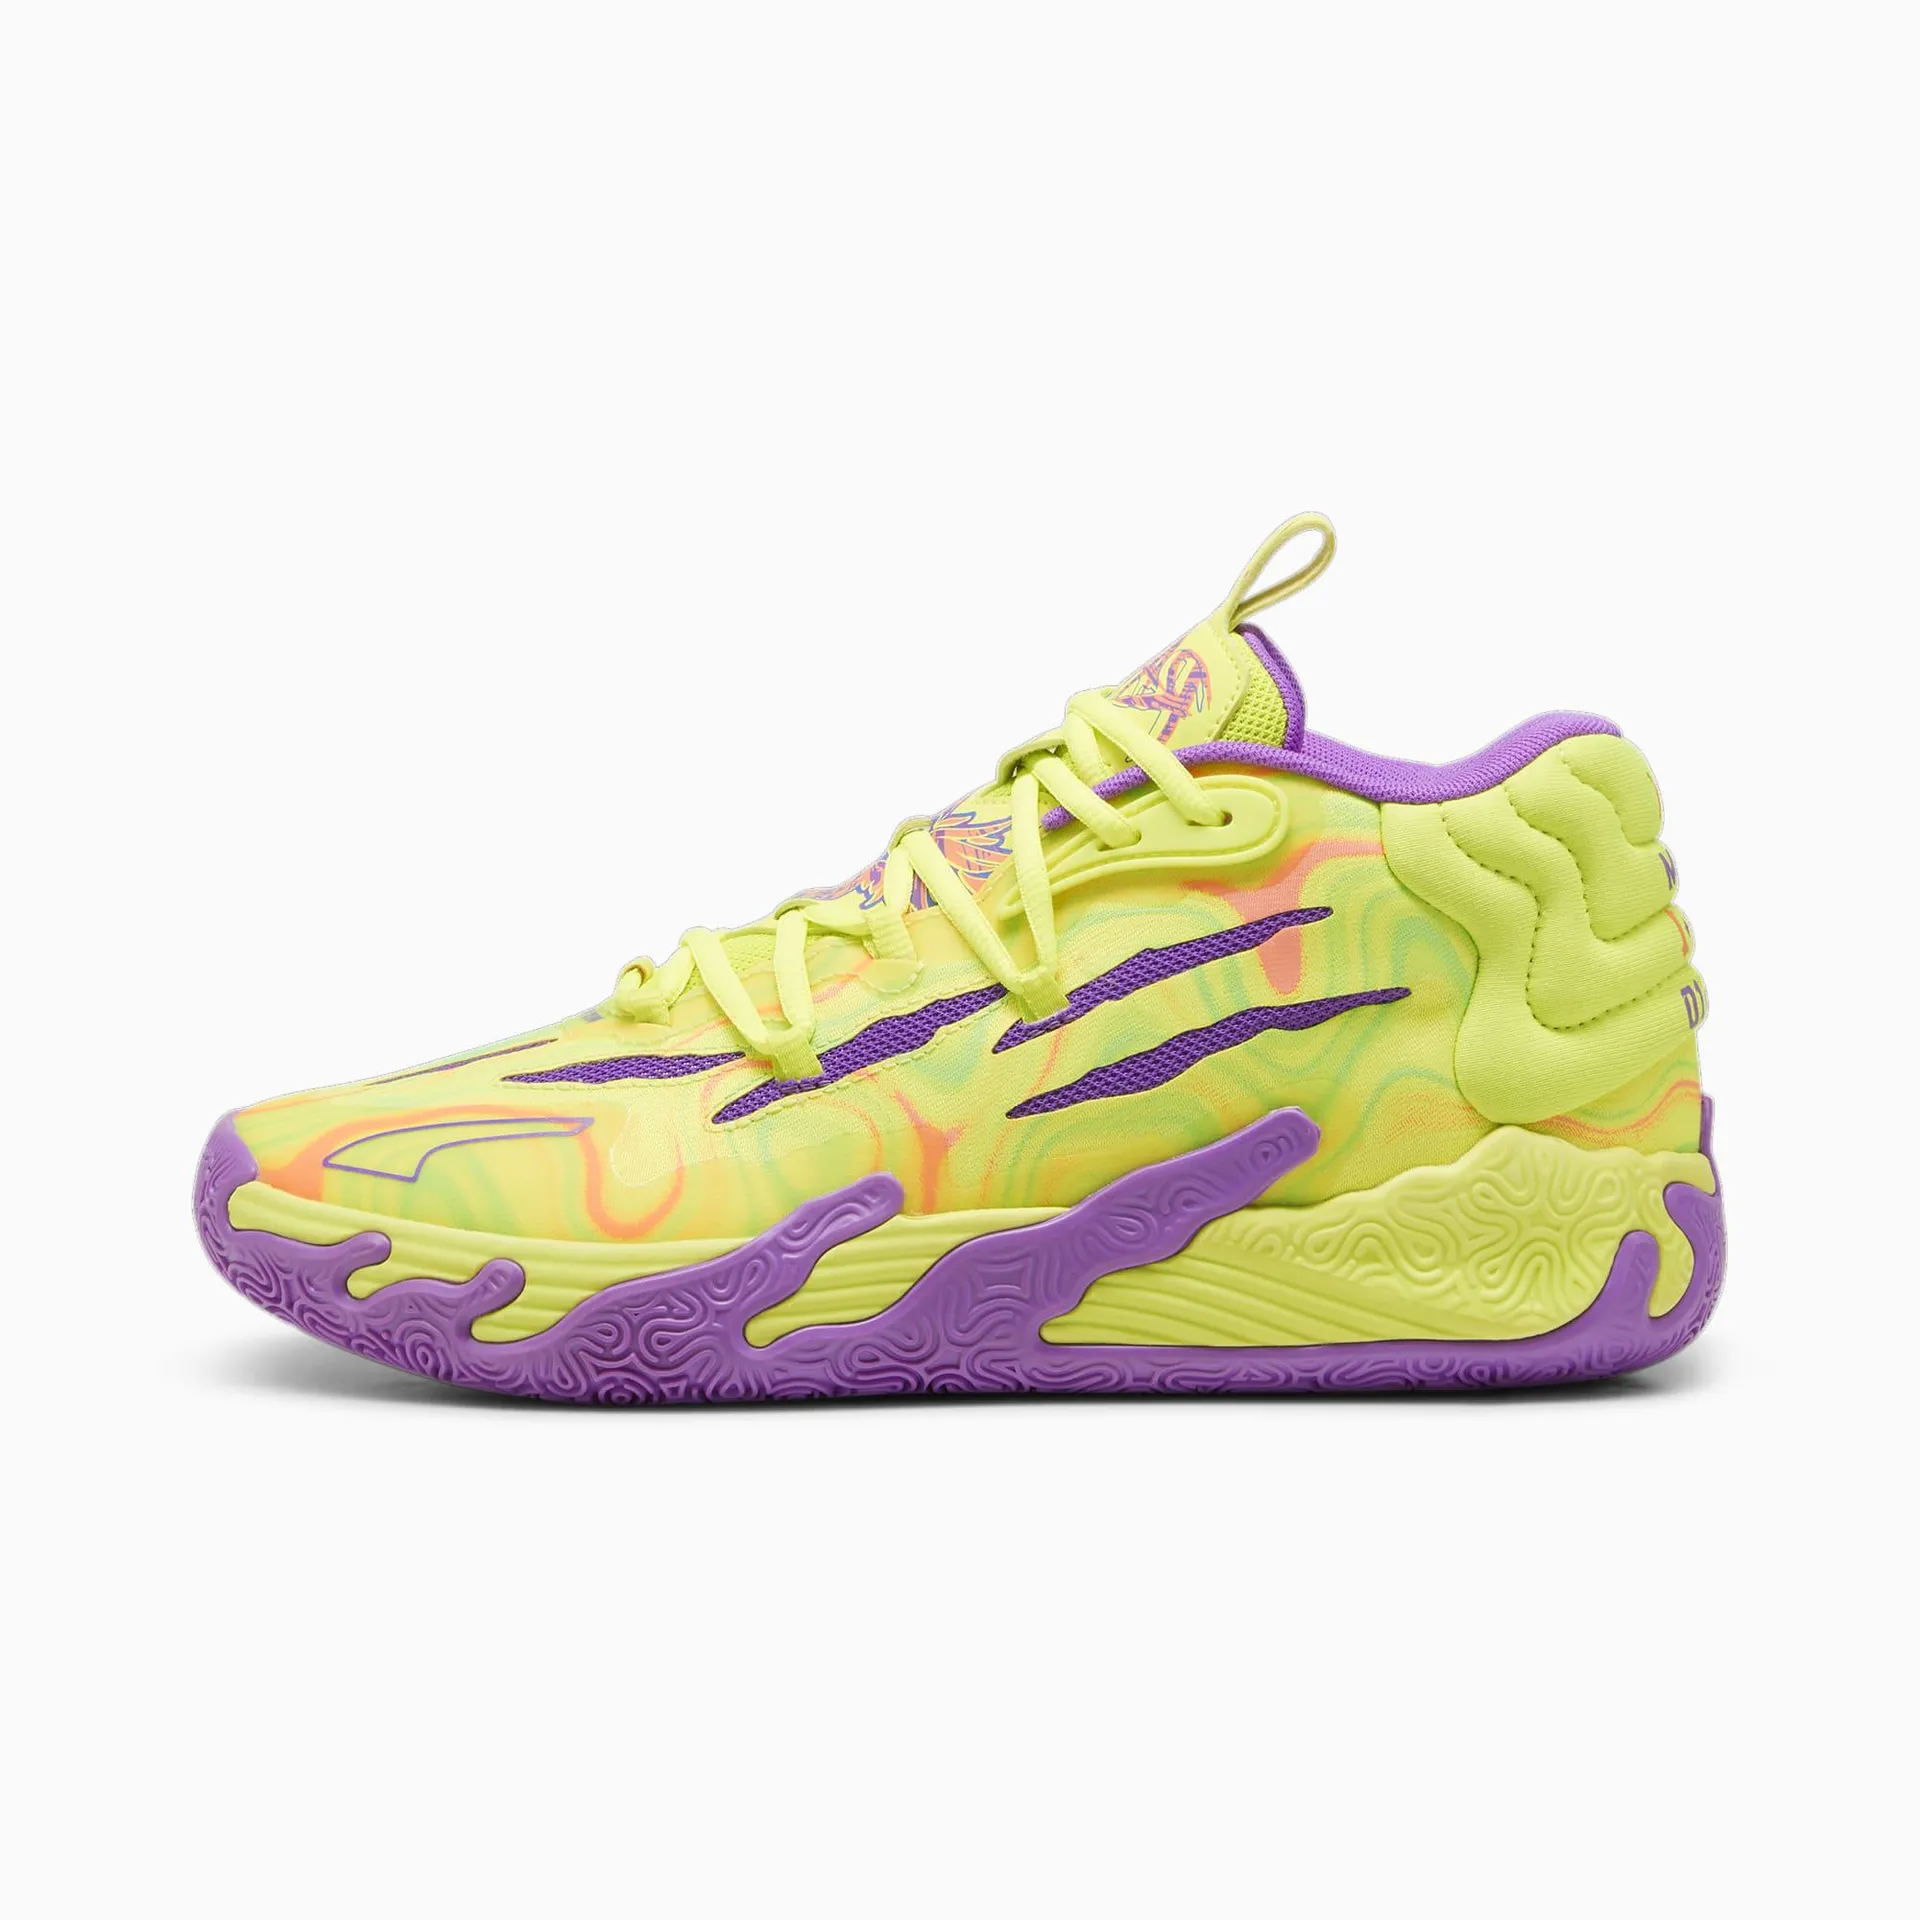 MB.03 Spark Basketball Shoes